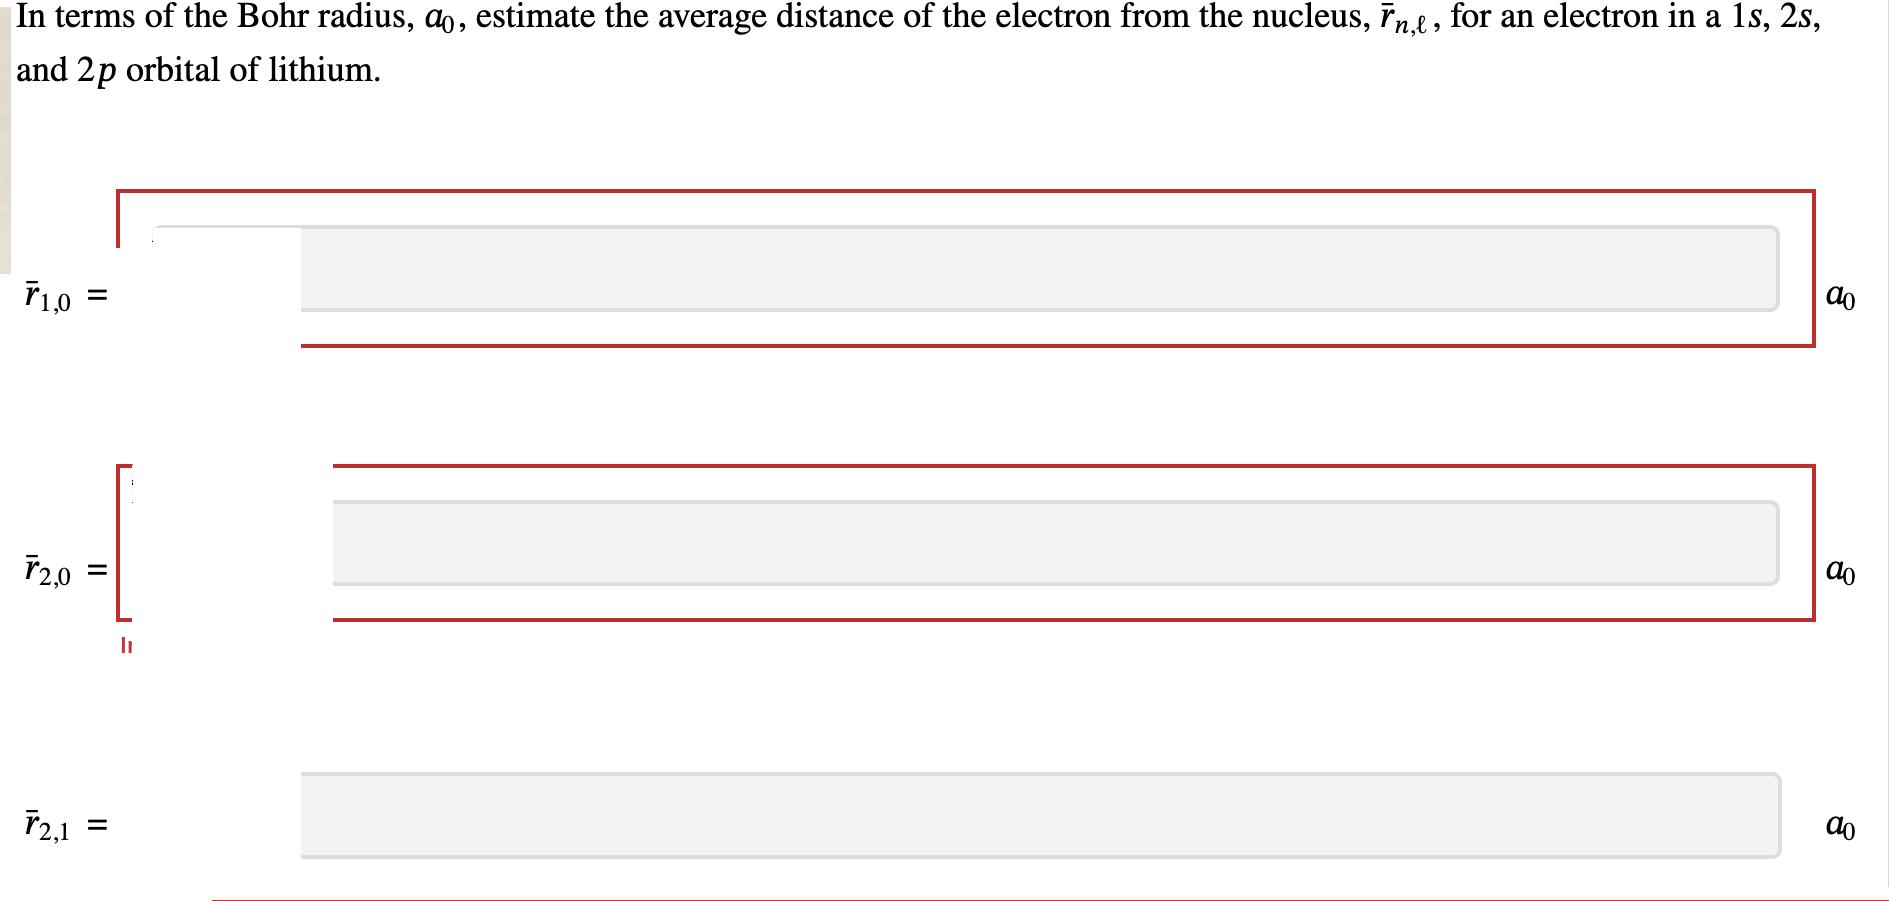 In terms of the Bohr radius, qo, estimate the average distance of the electron from the nucleus, rn,e, for an